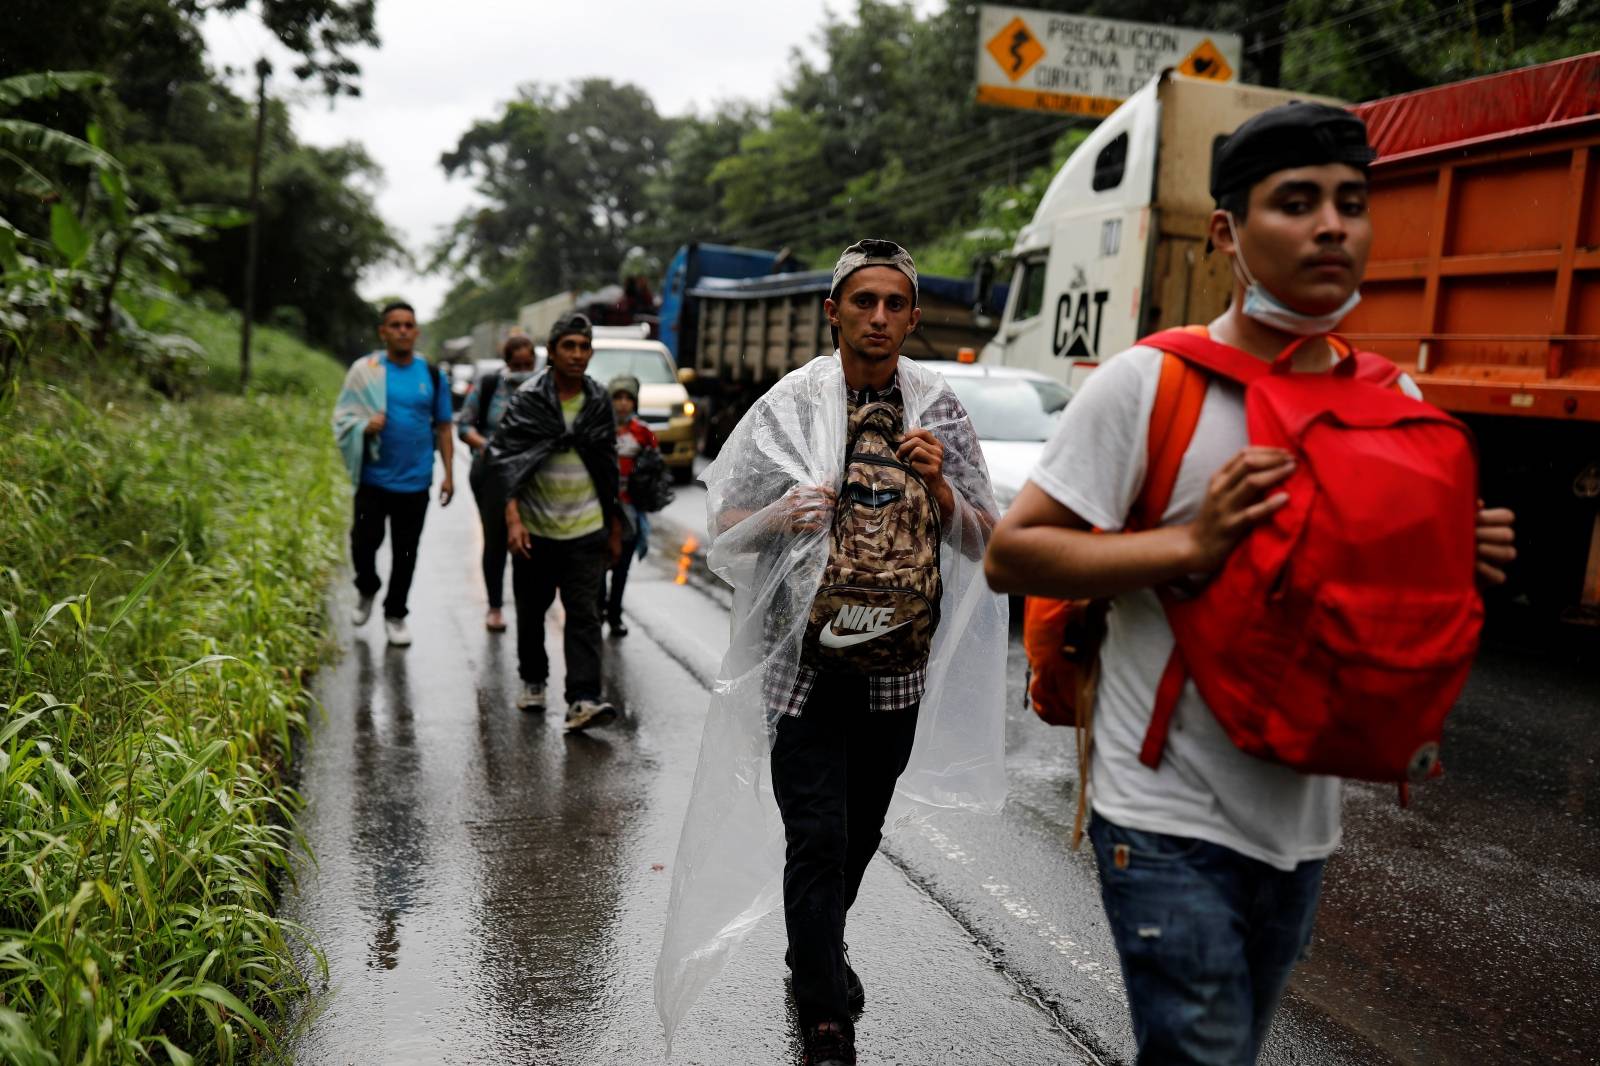 Honduran migrants trying to reach the U.S. walk along a road after bursting through a border checkpoint to enter Guatemala illegally, in Izabal